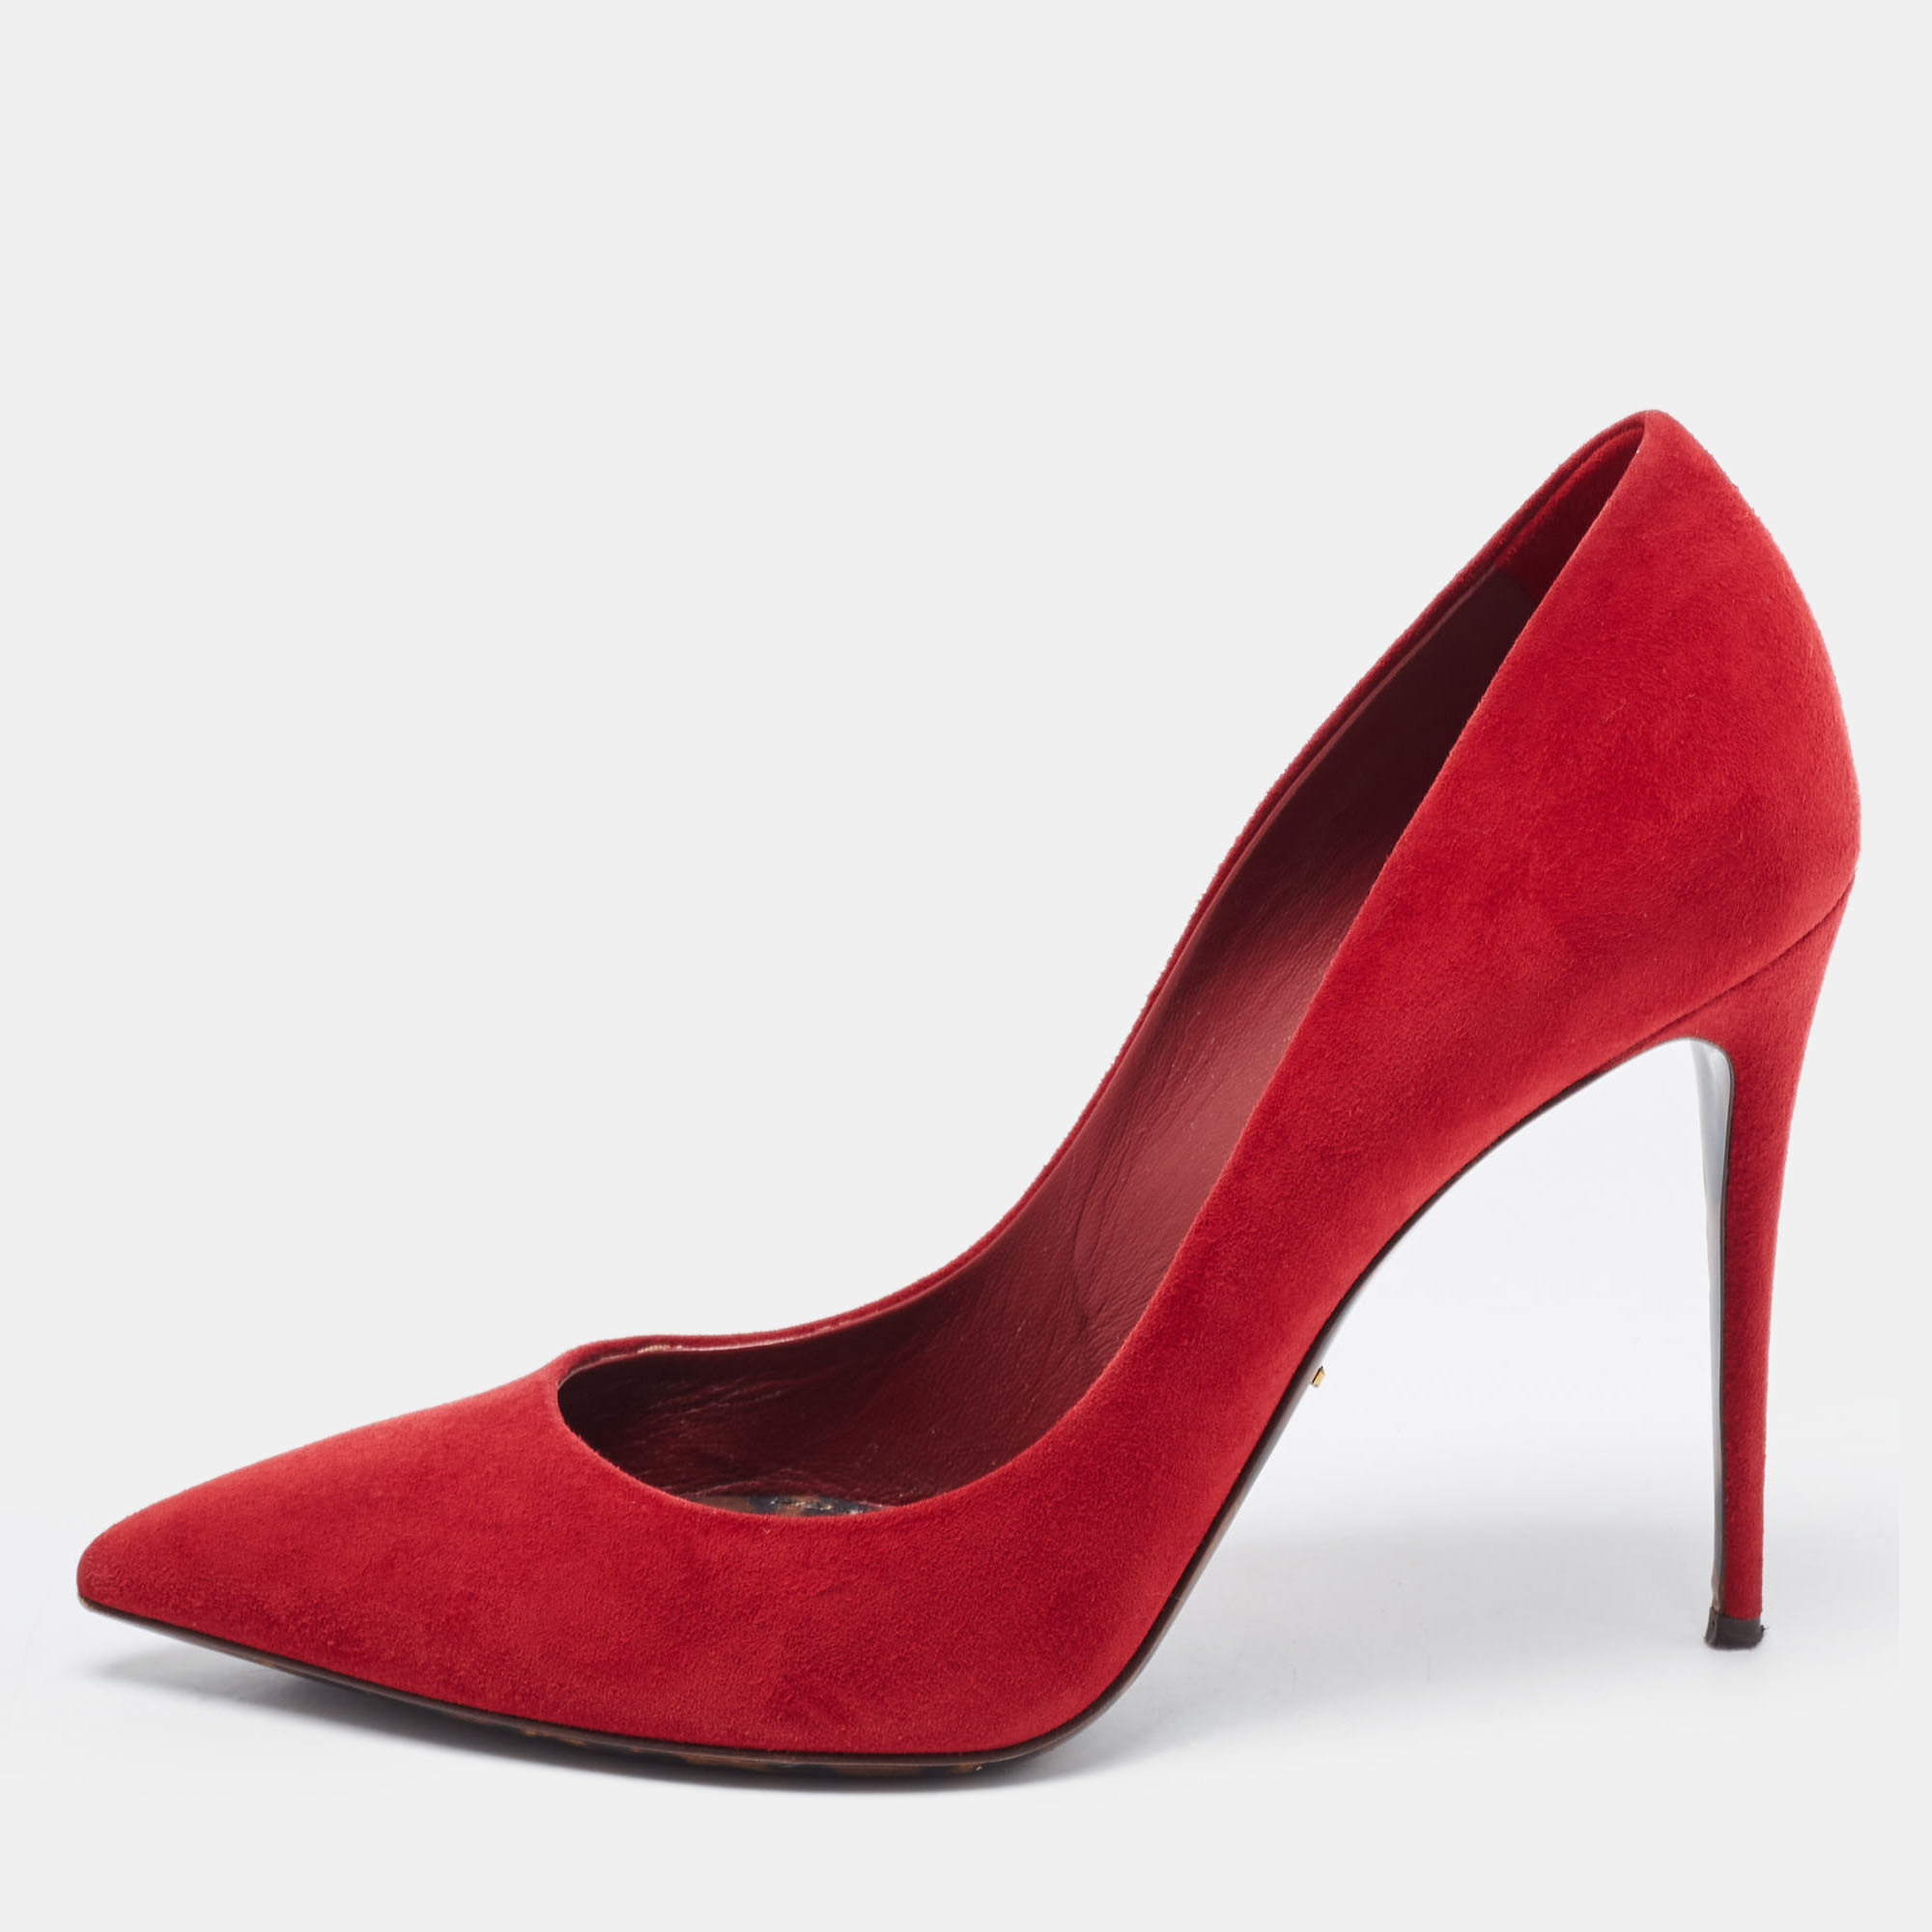 Dolce & Gabbana Red Suede Pointed Toe Pumps Size 38.5